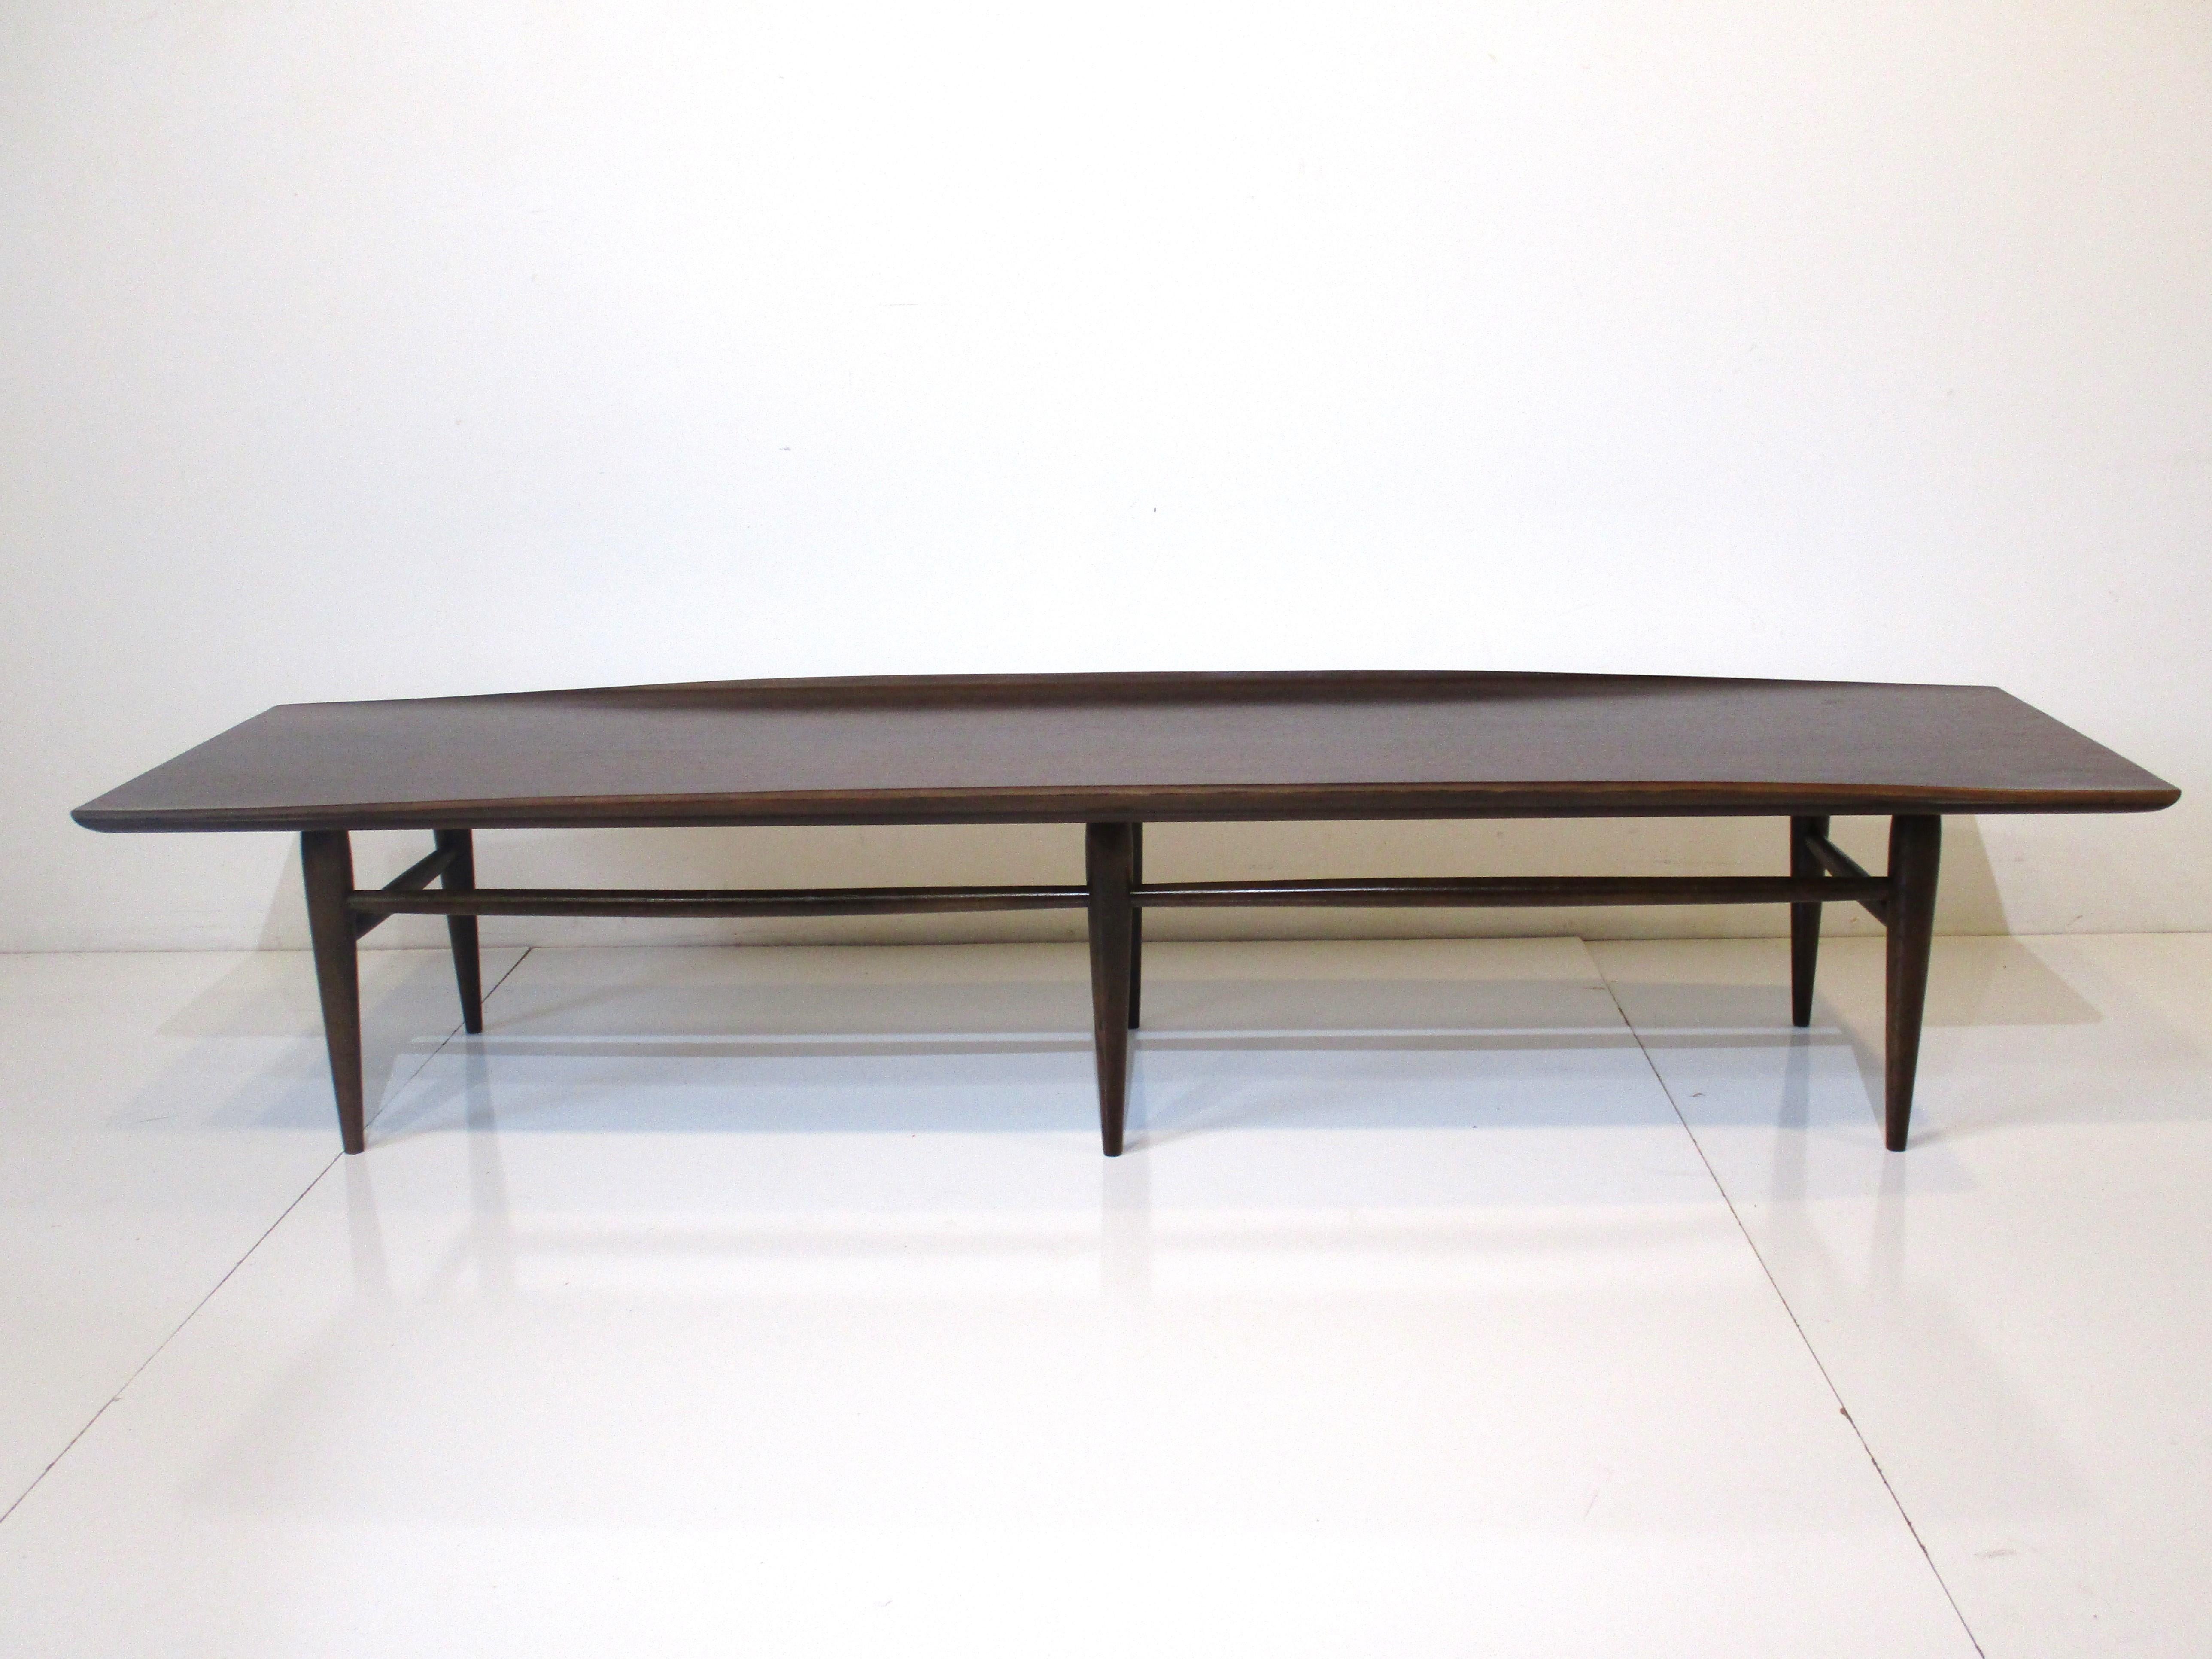 A long medium dark ebony toned wooden coffee table with up turned edges to both sides sitting on conical legs and stretches' to each one. Manufactured by the Drexel Furniture company, well made and the perfect piece for that Mid Century room.